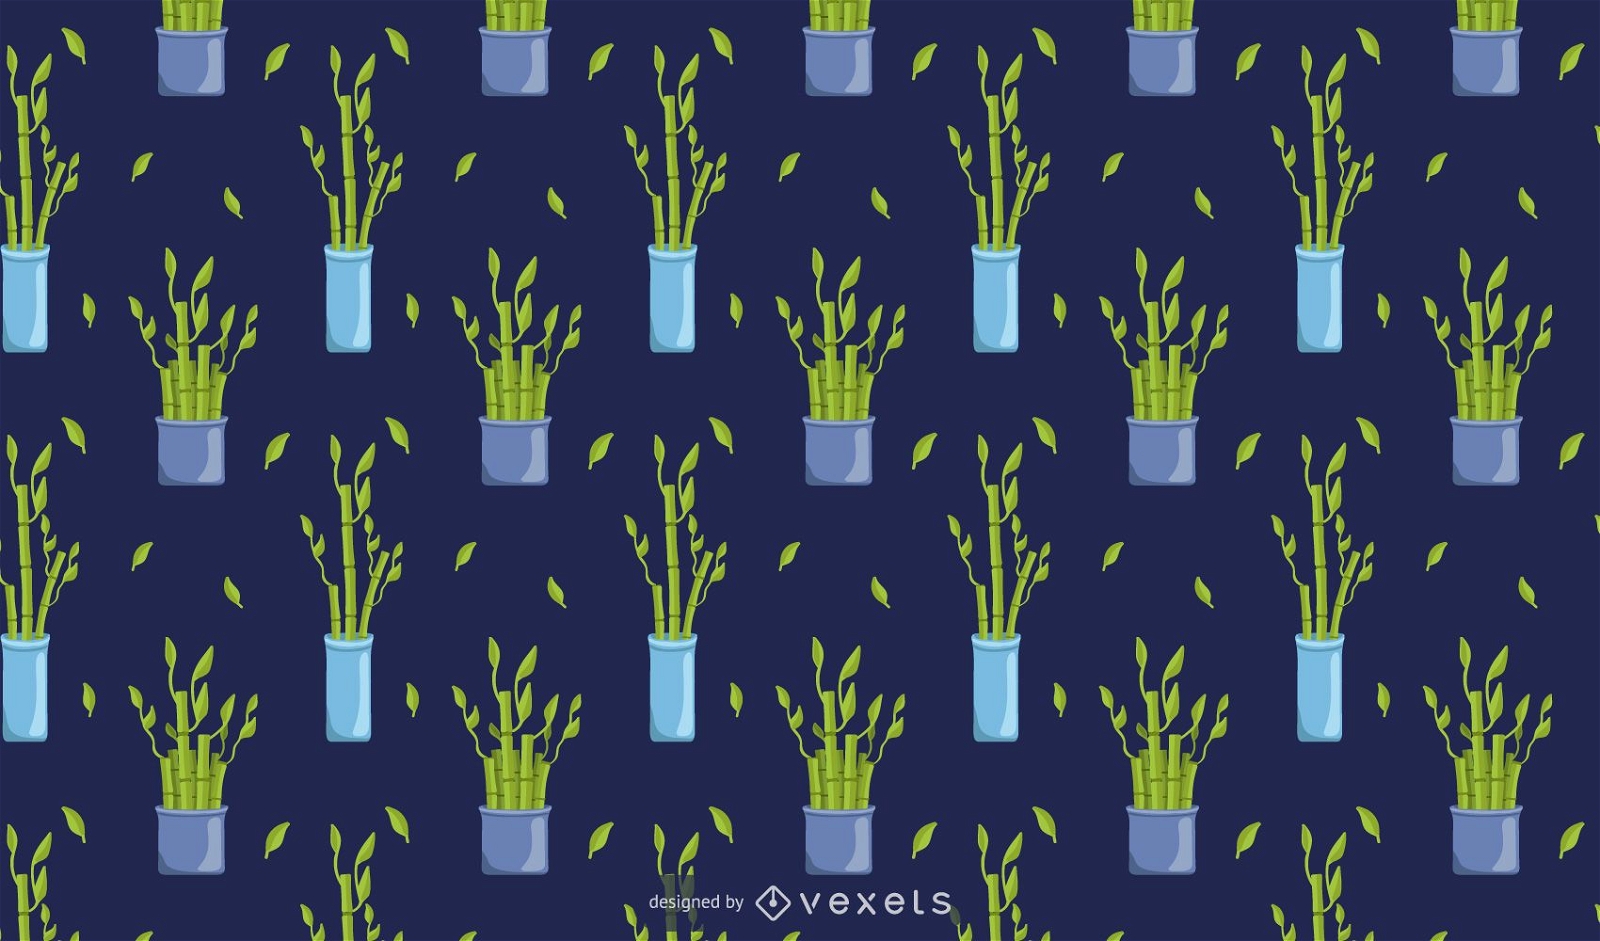 Bamboo lucky plant pattern design